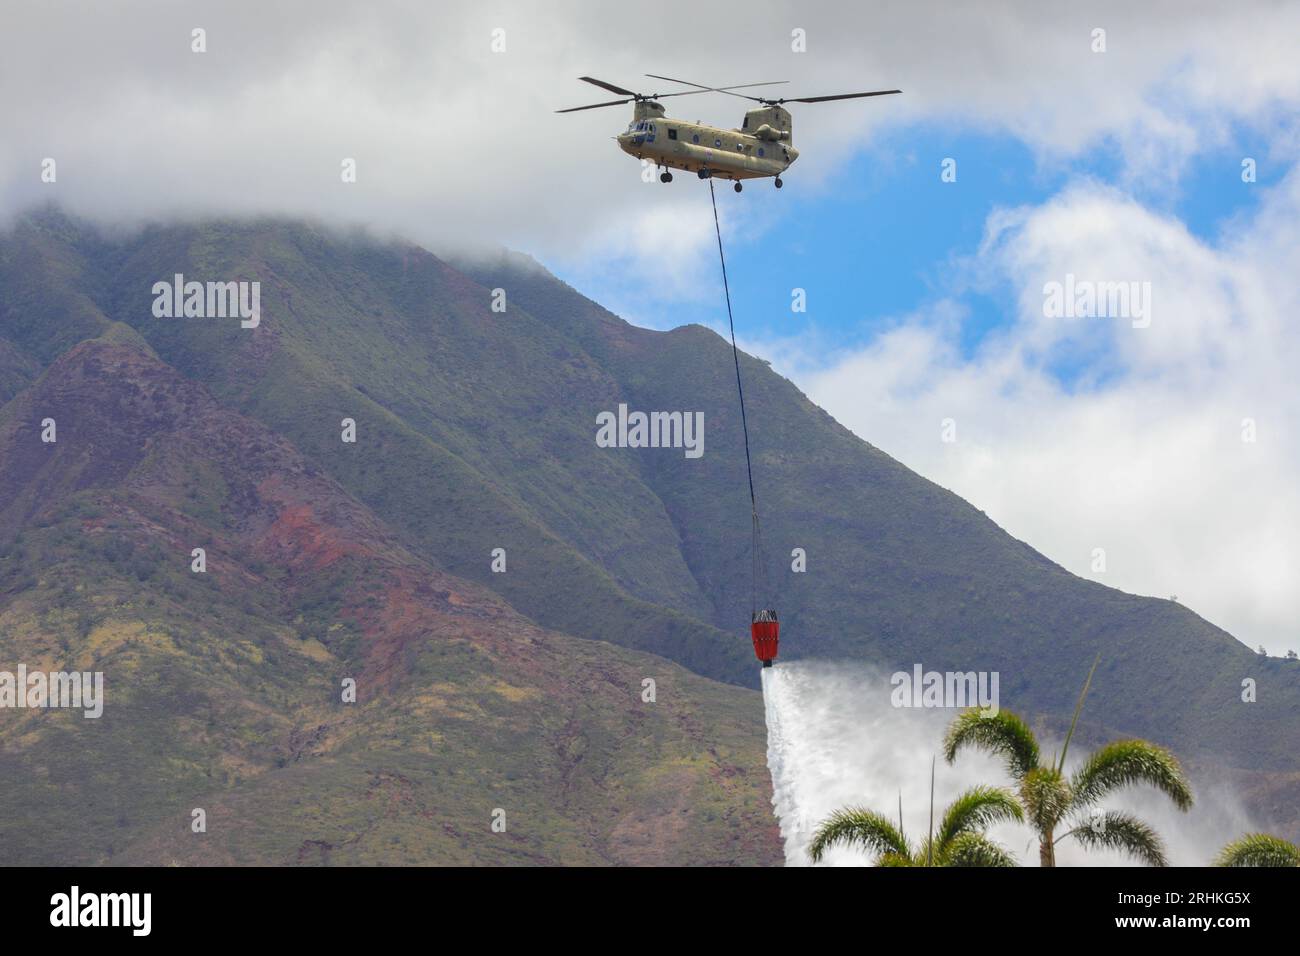 Lahaina, United States. 16 August, 2023. A U.S. Army CH-47 Chinook helicopter drops seawater around the perimeter of the area where wildfires swept across Western Maui, August 16, 2023 in Lahaina, Maui, Hawaii. Wildfires fanned by high winds killed at least 100 people and destroyed thousands of homes on the island.  Credit: Spc. Tonia Ciancanelli/U.S. National Guard/Alamy Live News Stock Photo